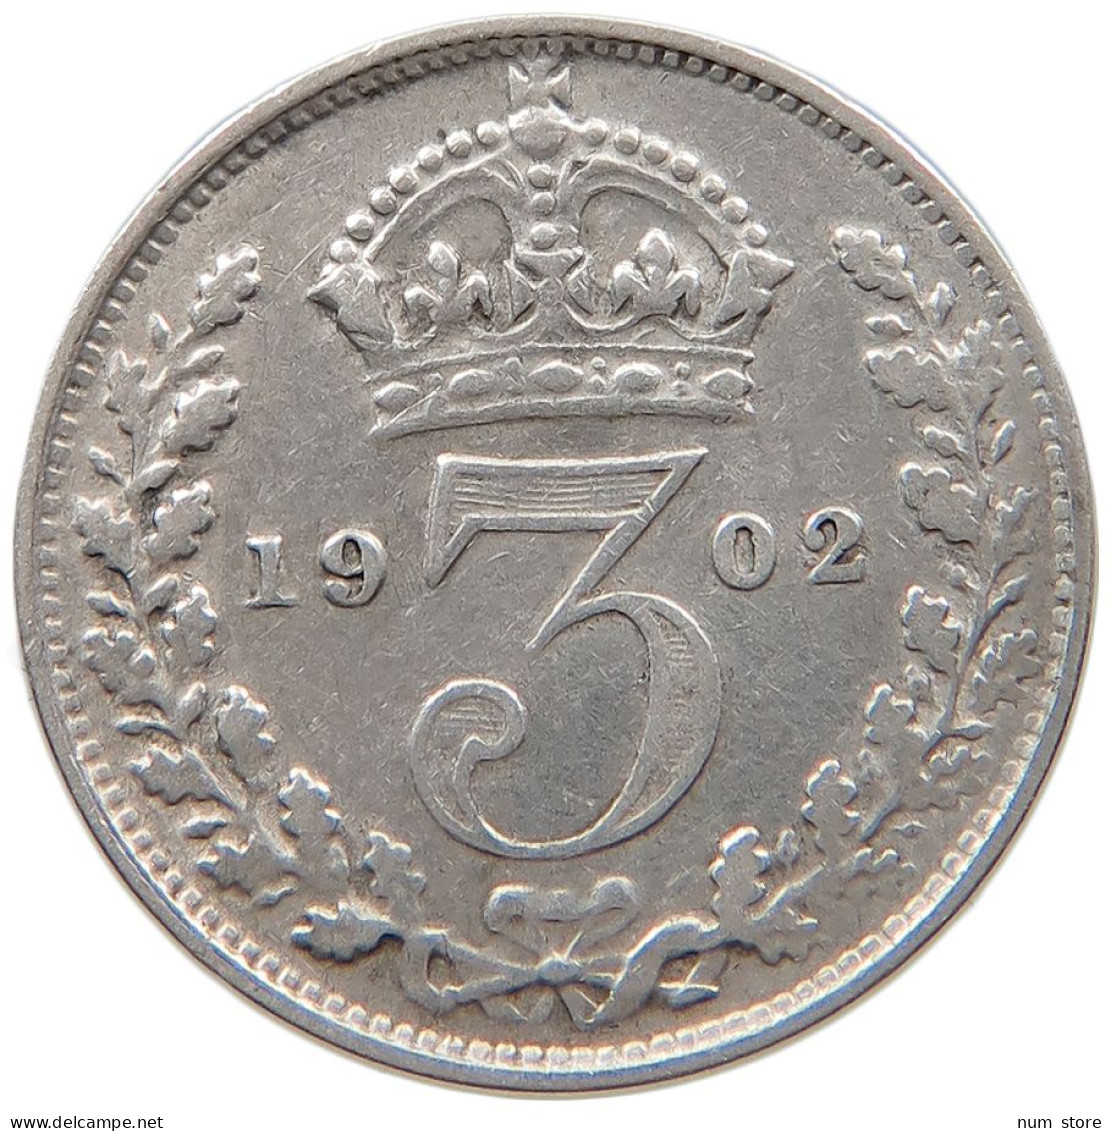 GREAT BRITAIN THREEPENCE 1902 #s100 0739 - F. 3 Pence